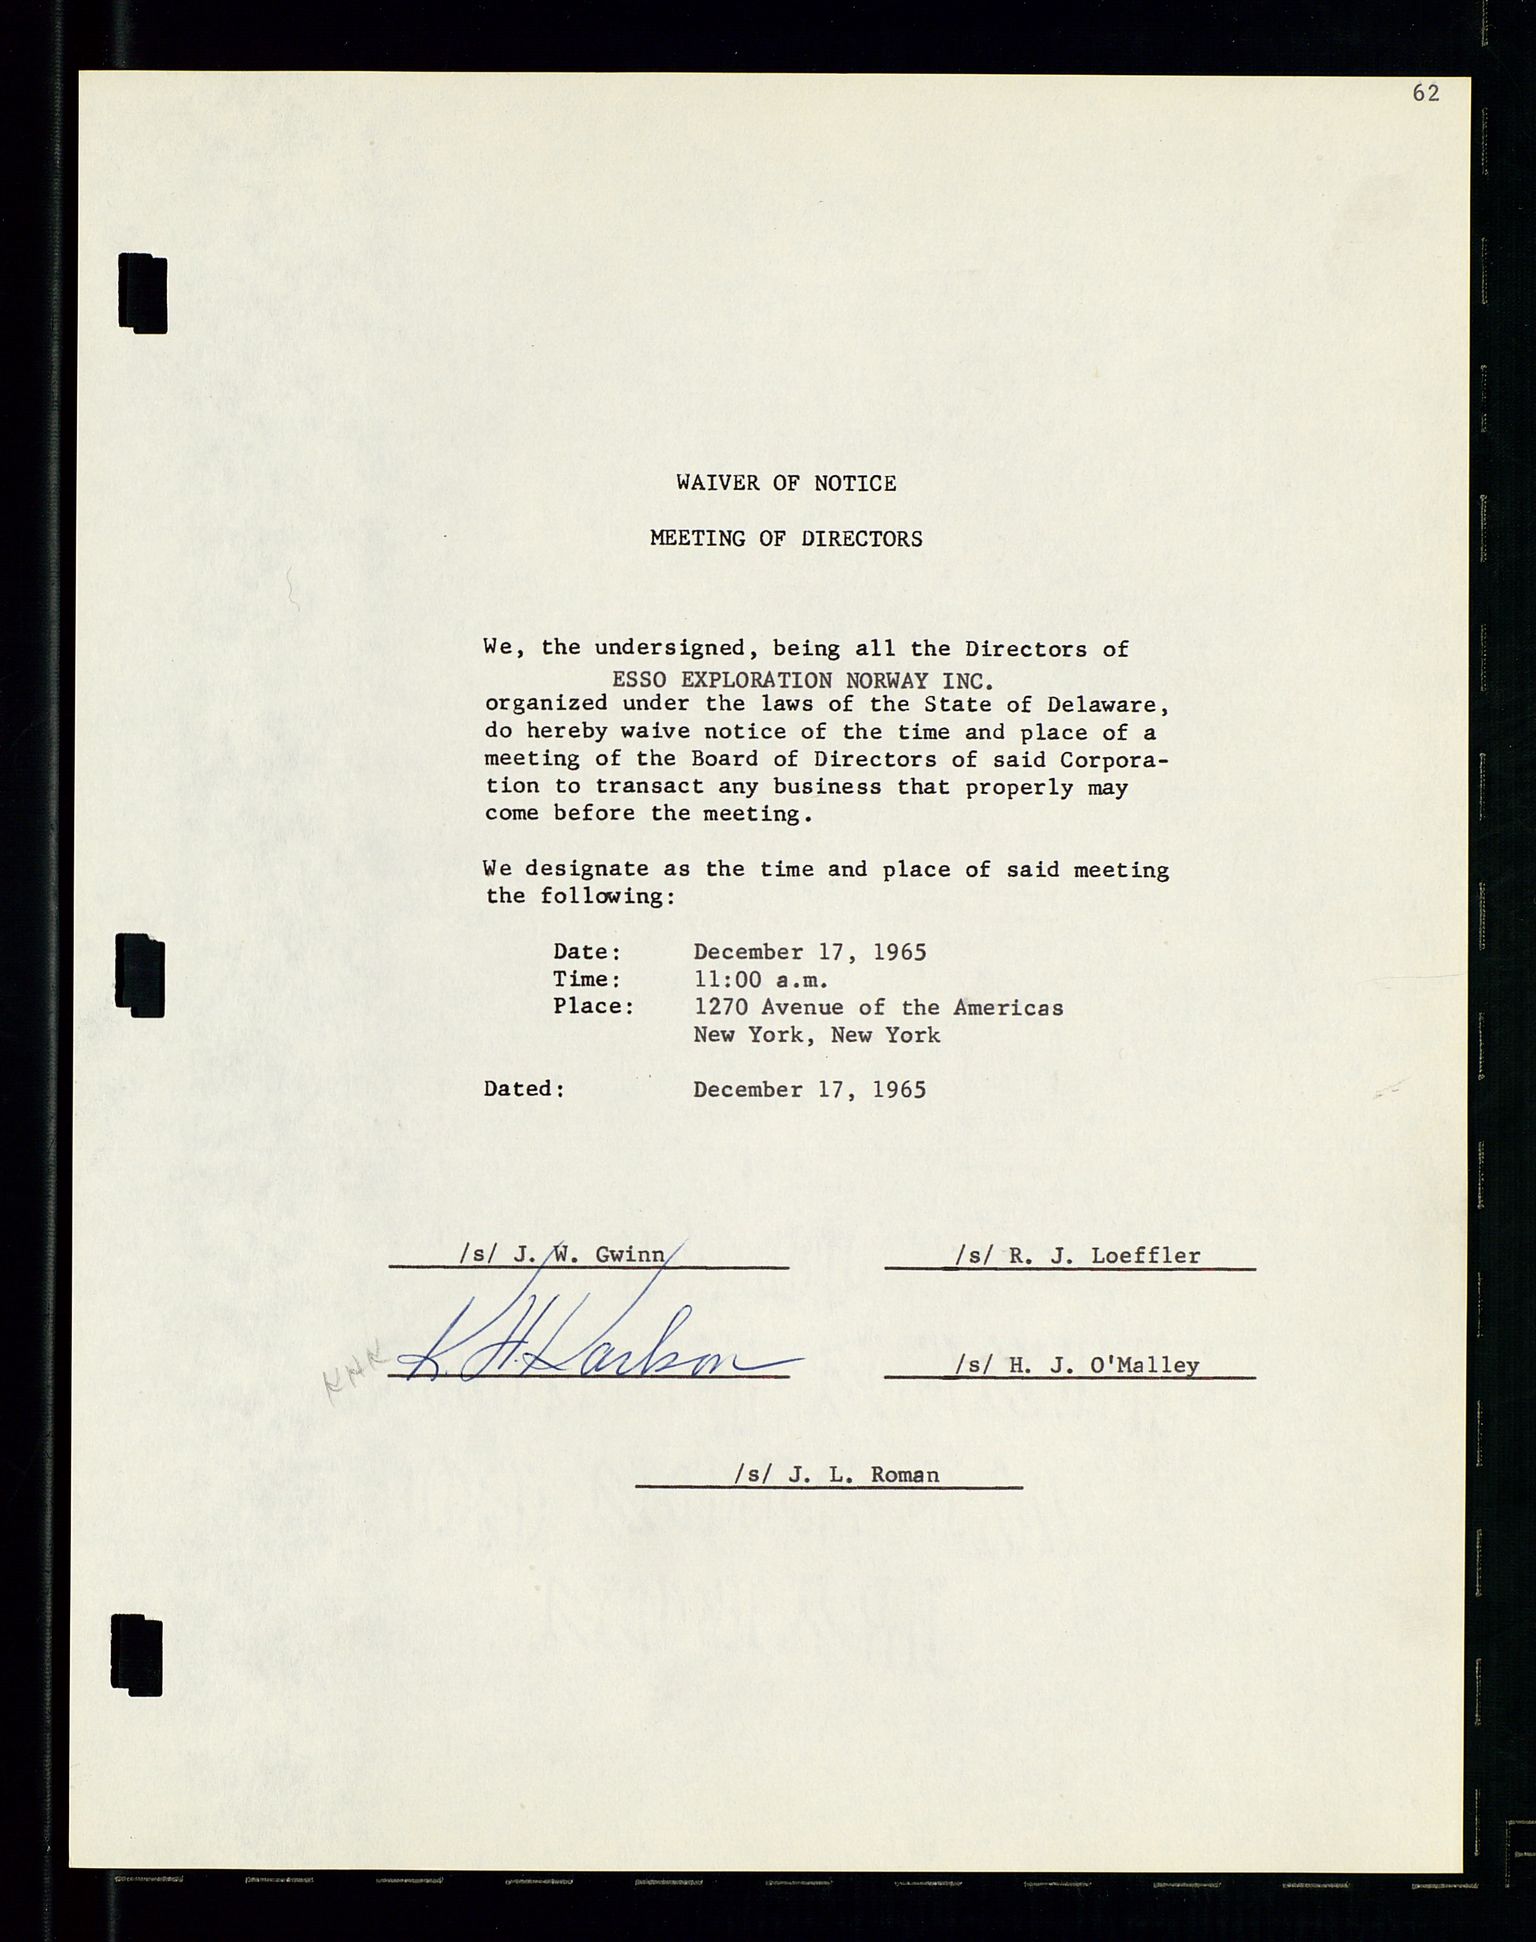 Pa 1512 - Esso Exploration and Production Norway Inc., SAST/A-101917/A/Aa/L0001/0001: Styredokumenter / Corporate records, By-Laws, Board meeting minutes, Incorporations, 1965-1975, s. 62